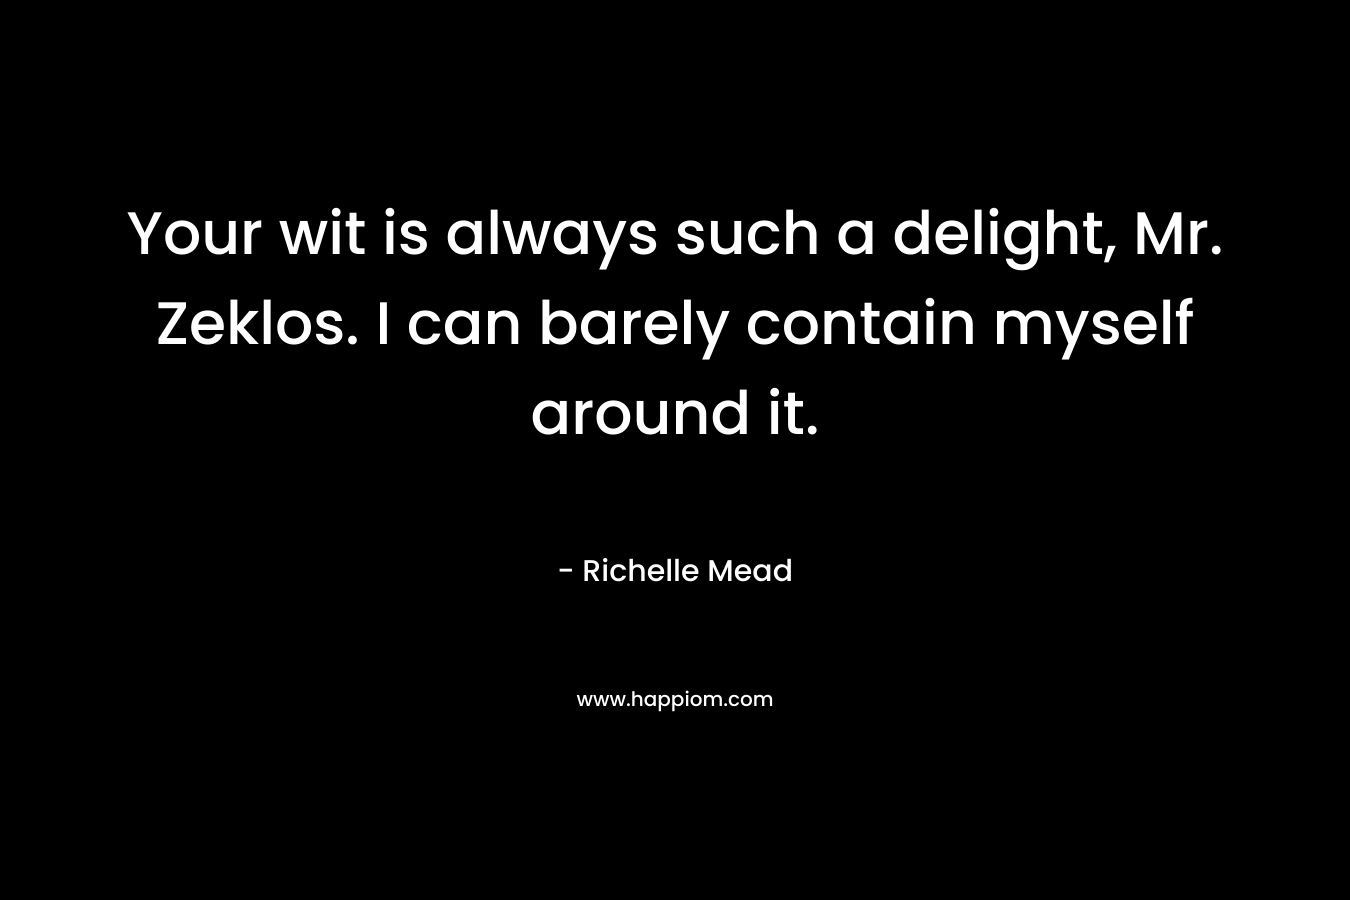 Your wit is always such a delight, Mr. Zeklos. I can barely contain myself around it. – Richelle Mead